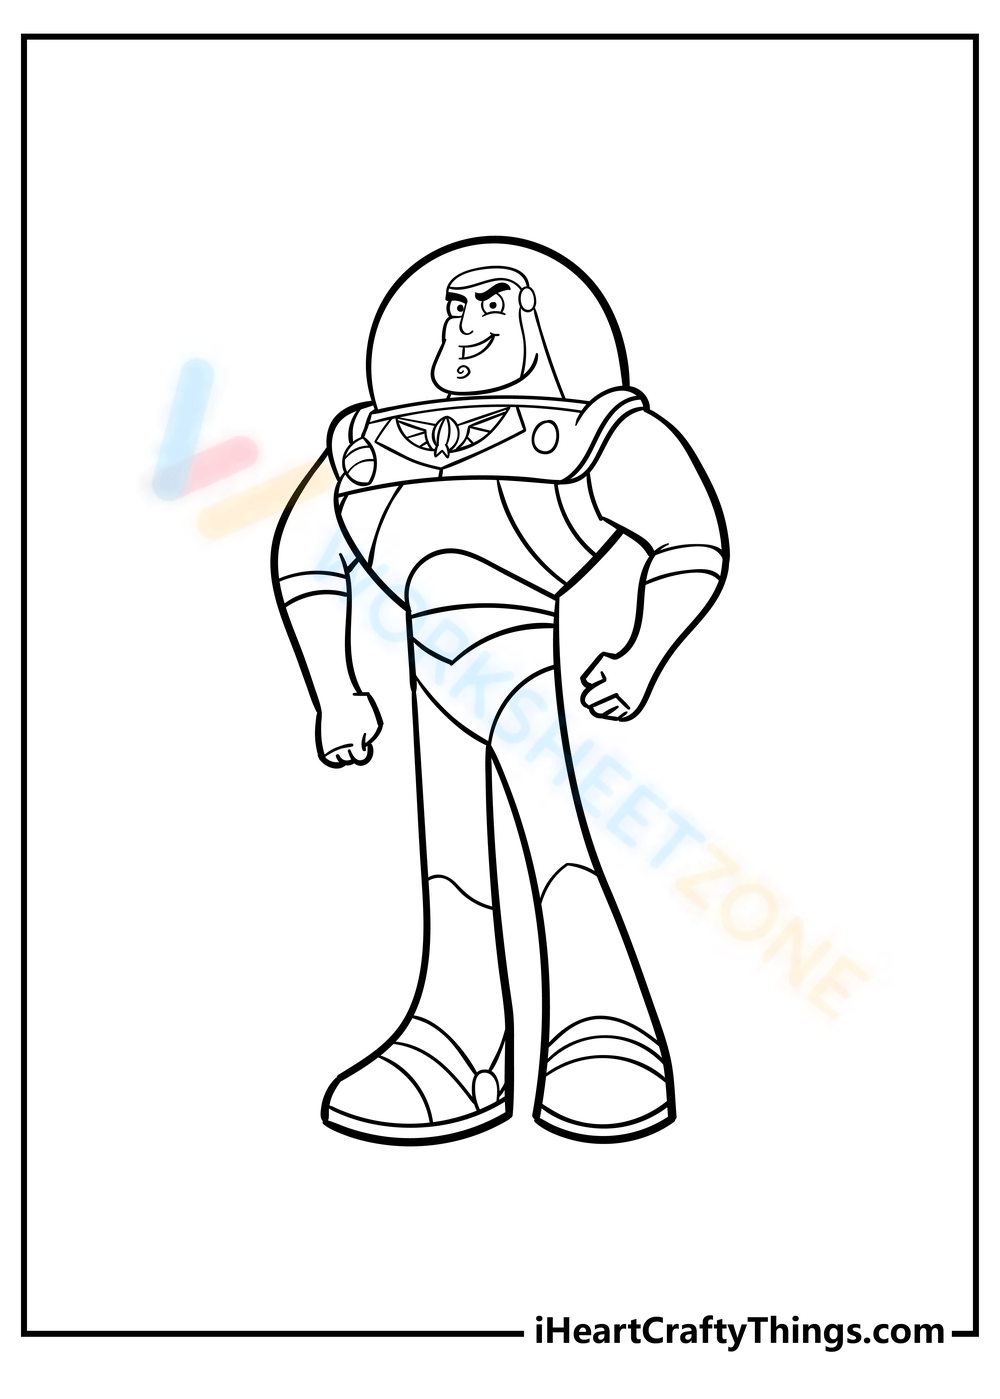 College buzz lightyear coloring page worksheets